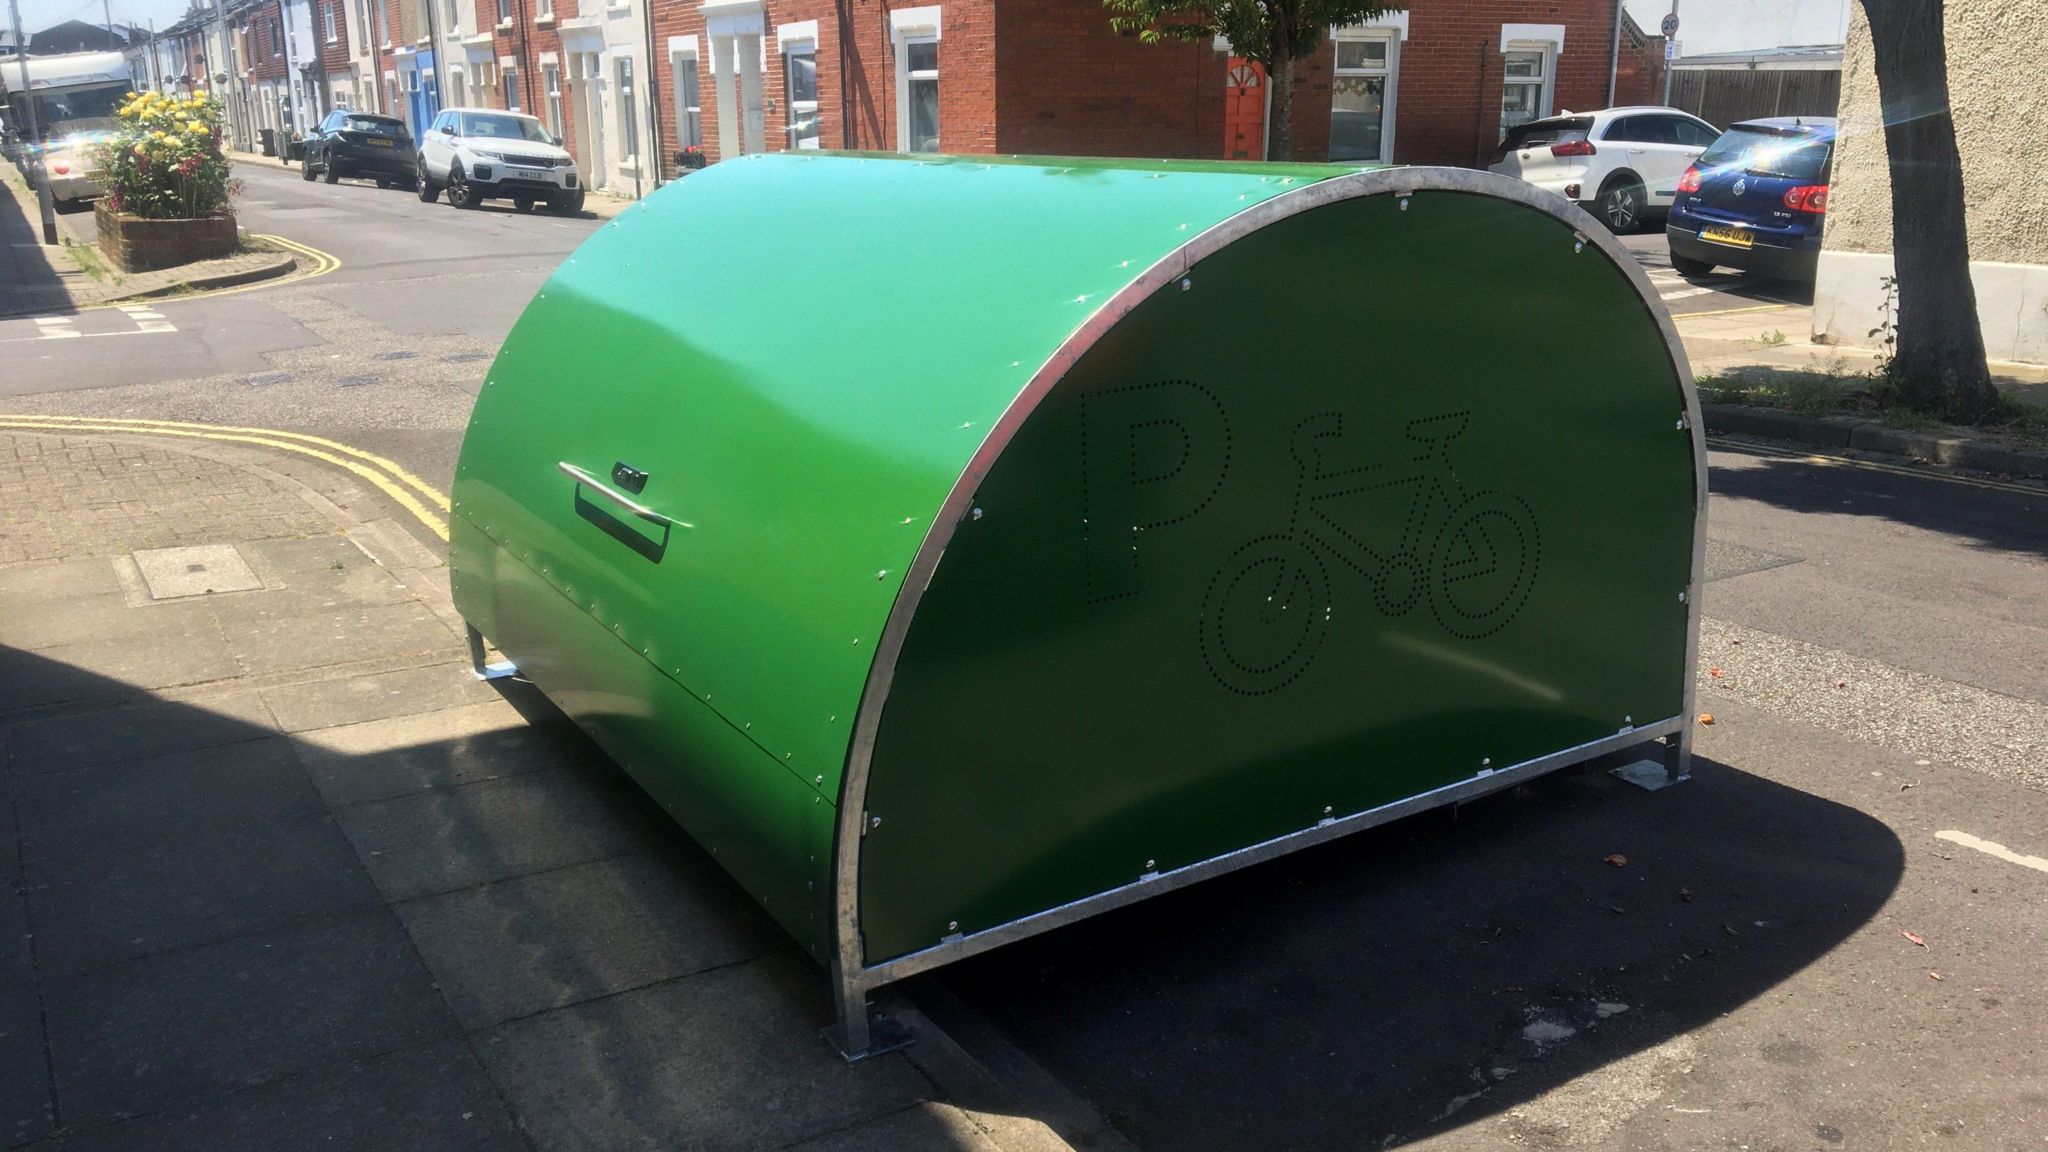 Bright green bike hangar on the road in a street in portsmouth